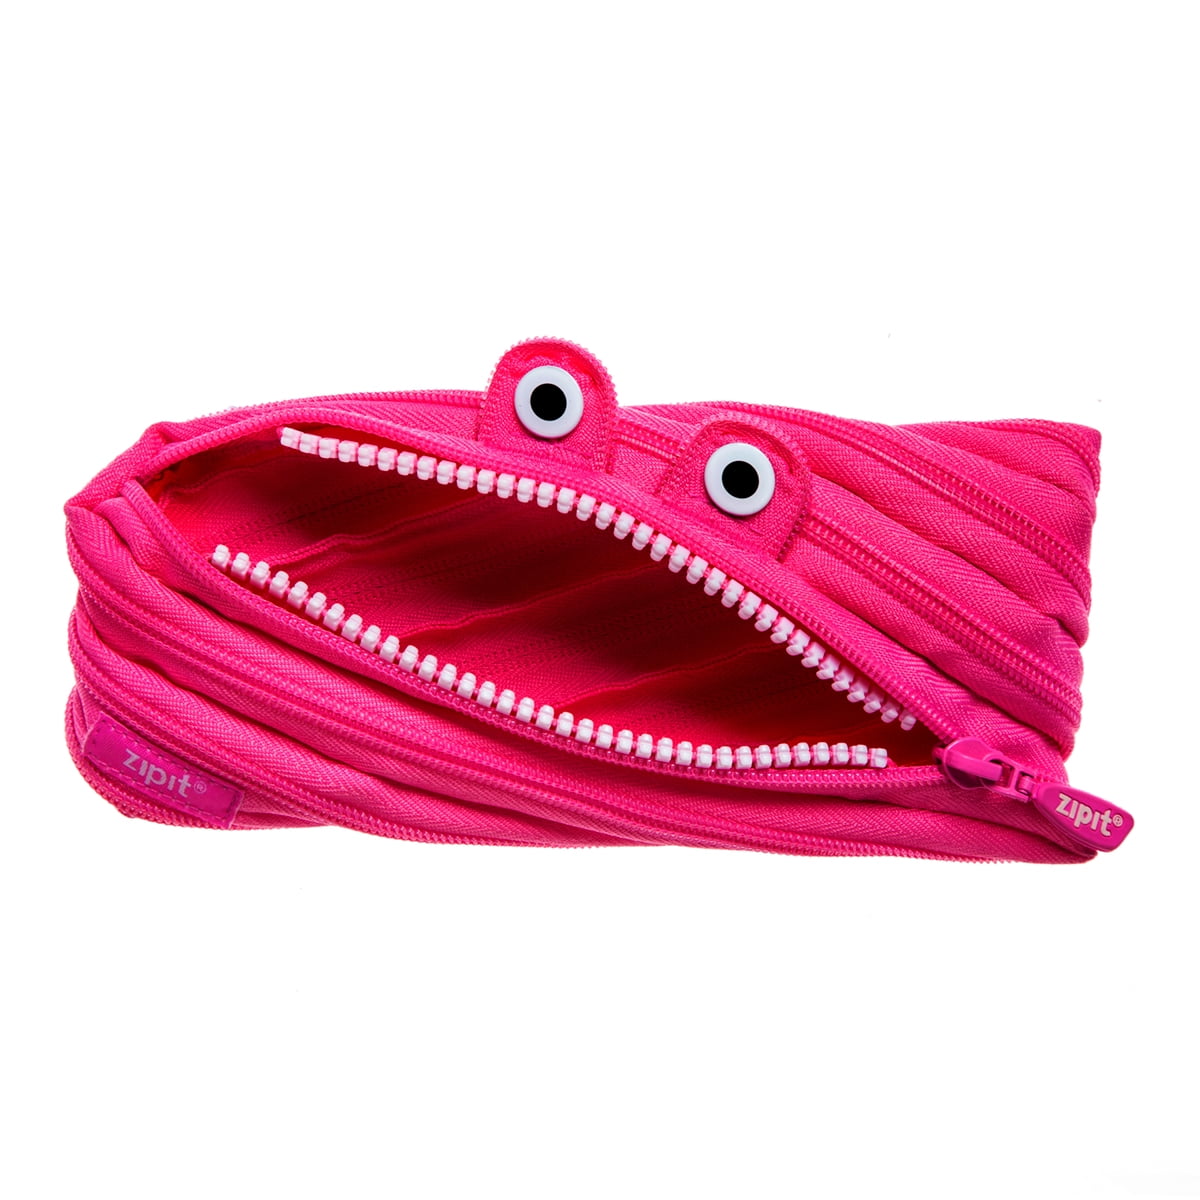 ZIPIT Monster Pencil Case for Kids, Holds up to 30 Pens, Machine Washable, Made of One Long Zipper! (Pink)